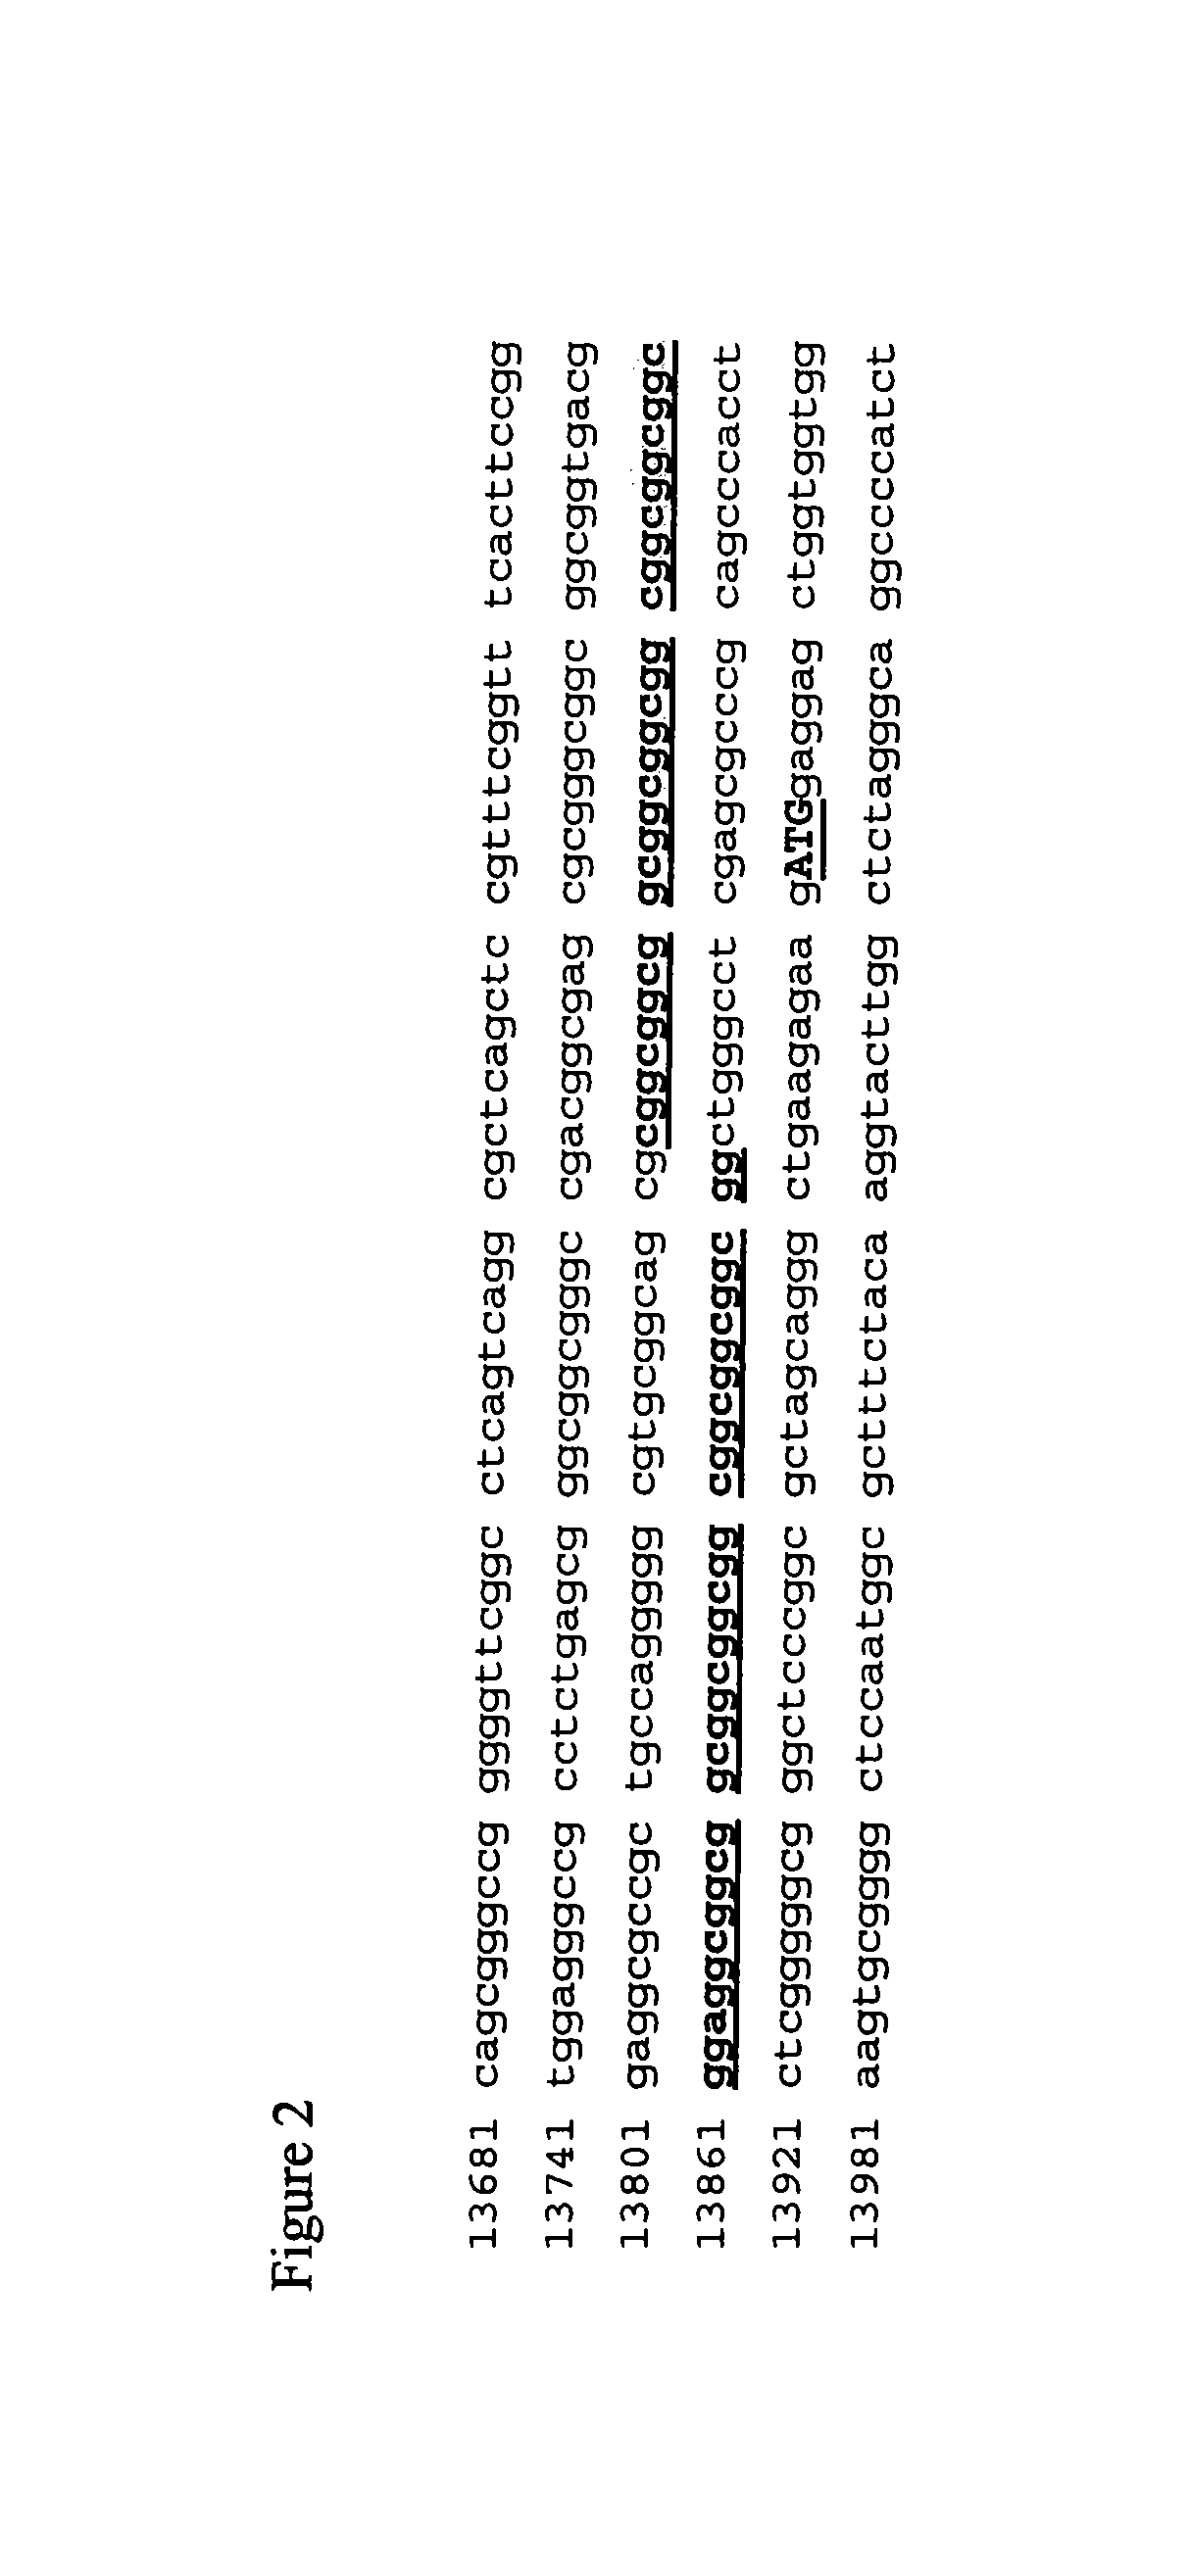 Methods for Detecting The Presence of Expanded CGG Repeats in the FMR1 Gene 5' Untranslated Region